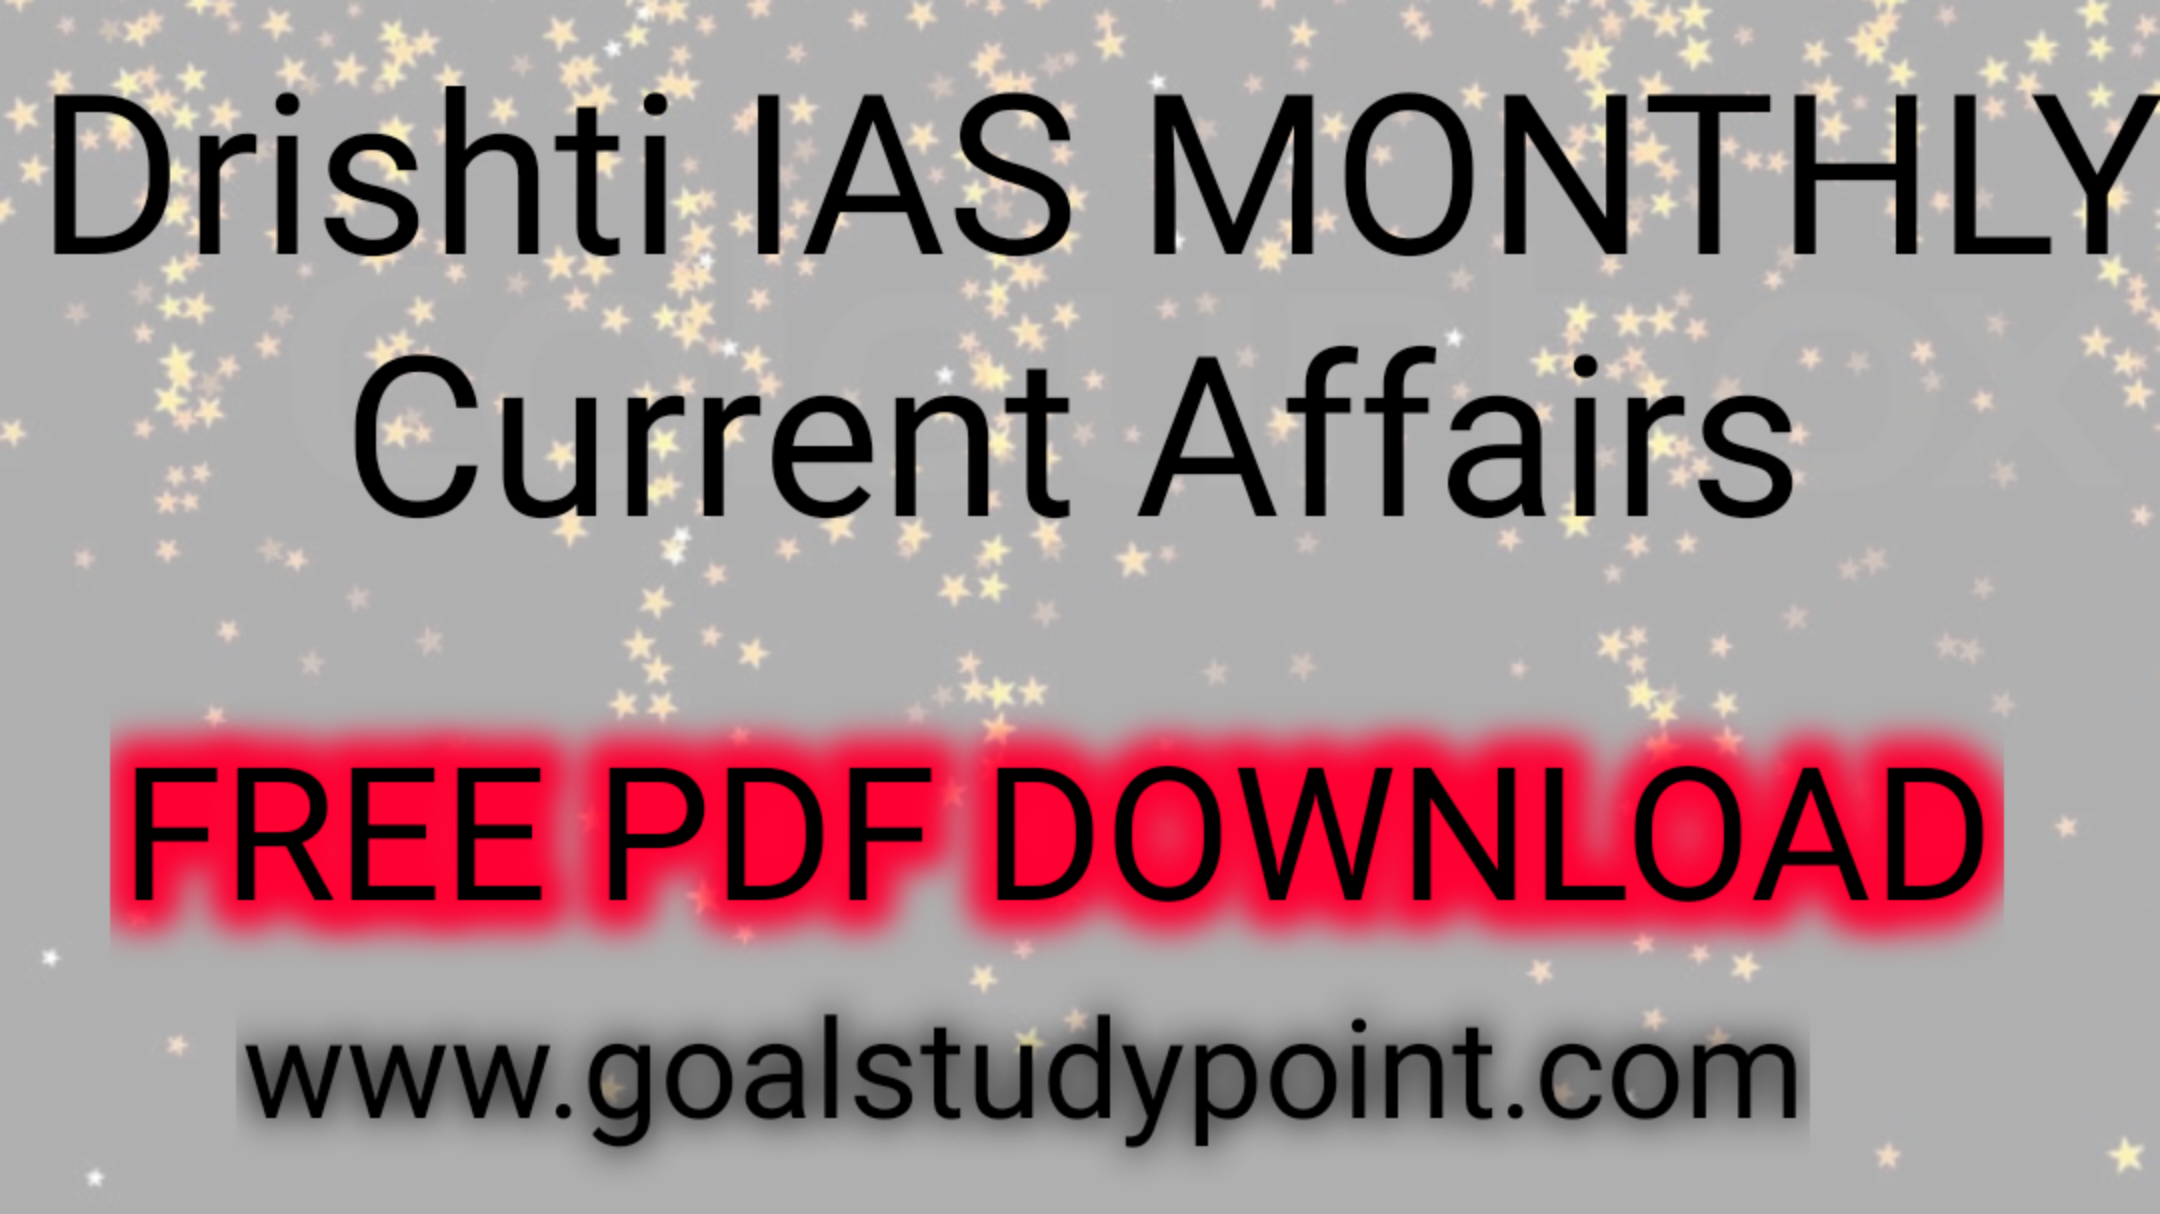 Vision IAS Monthly Current Affairs PDF Download